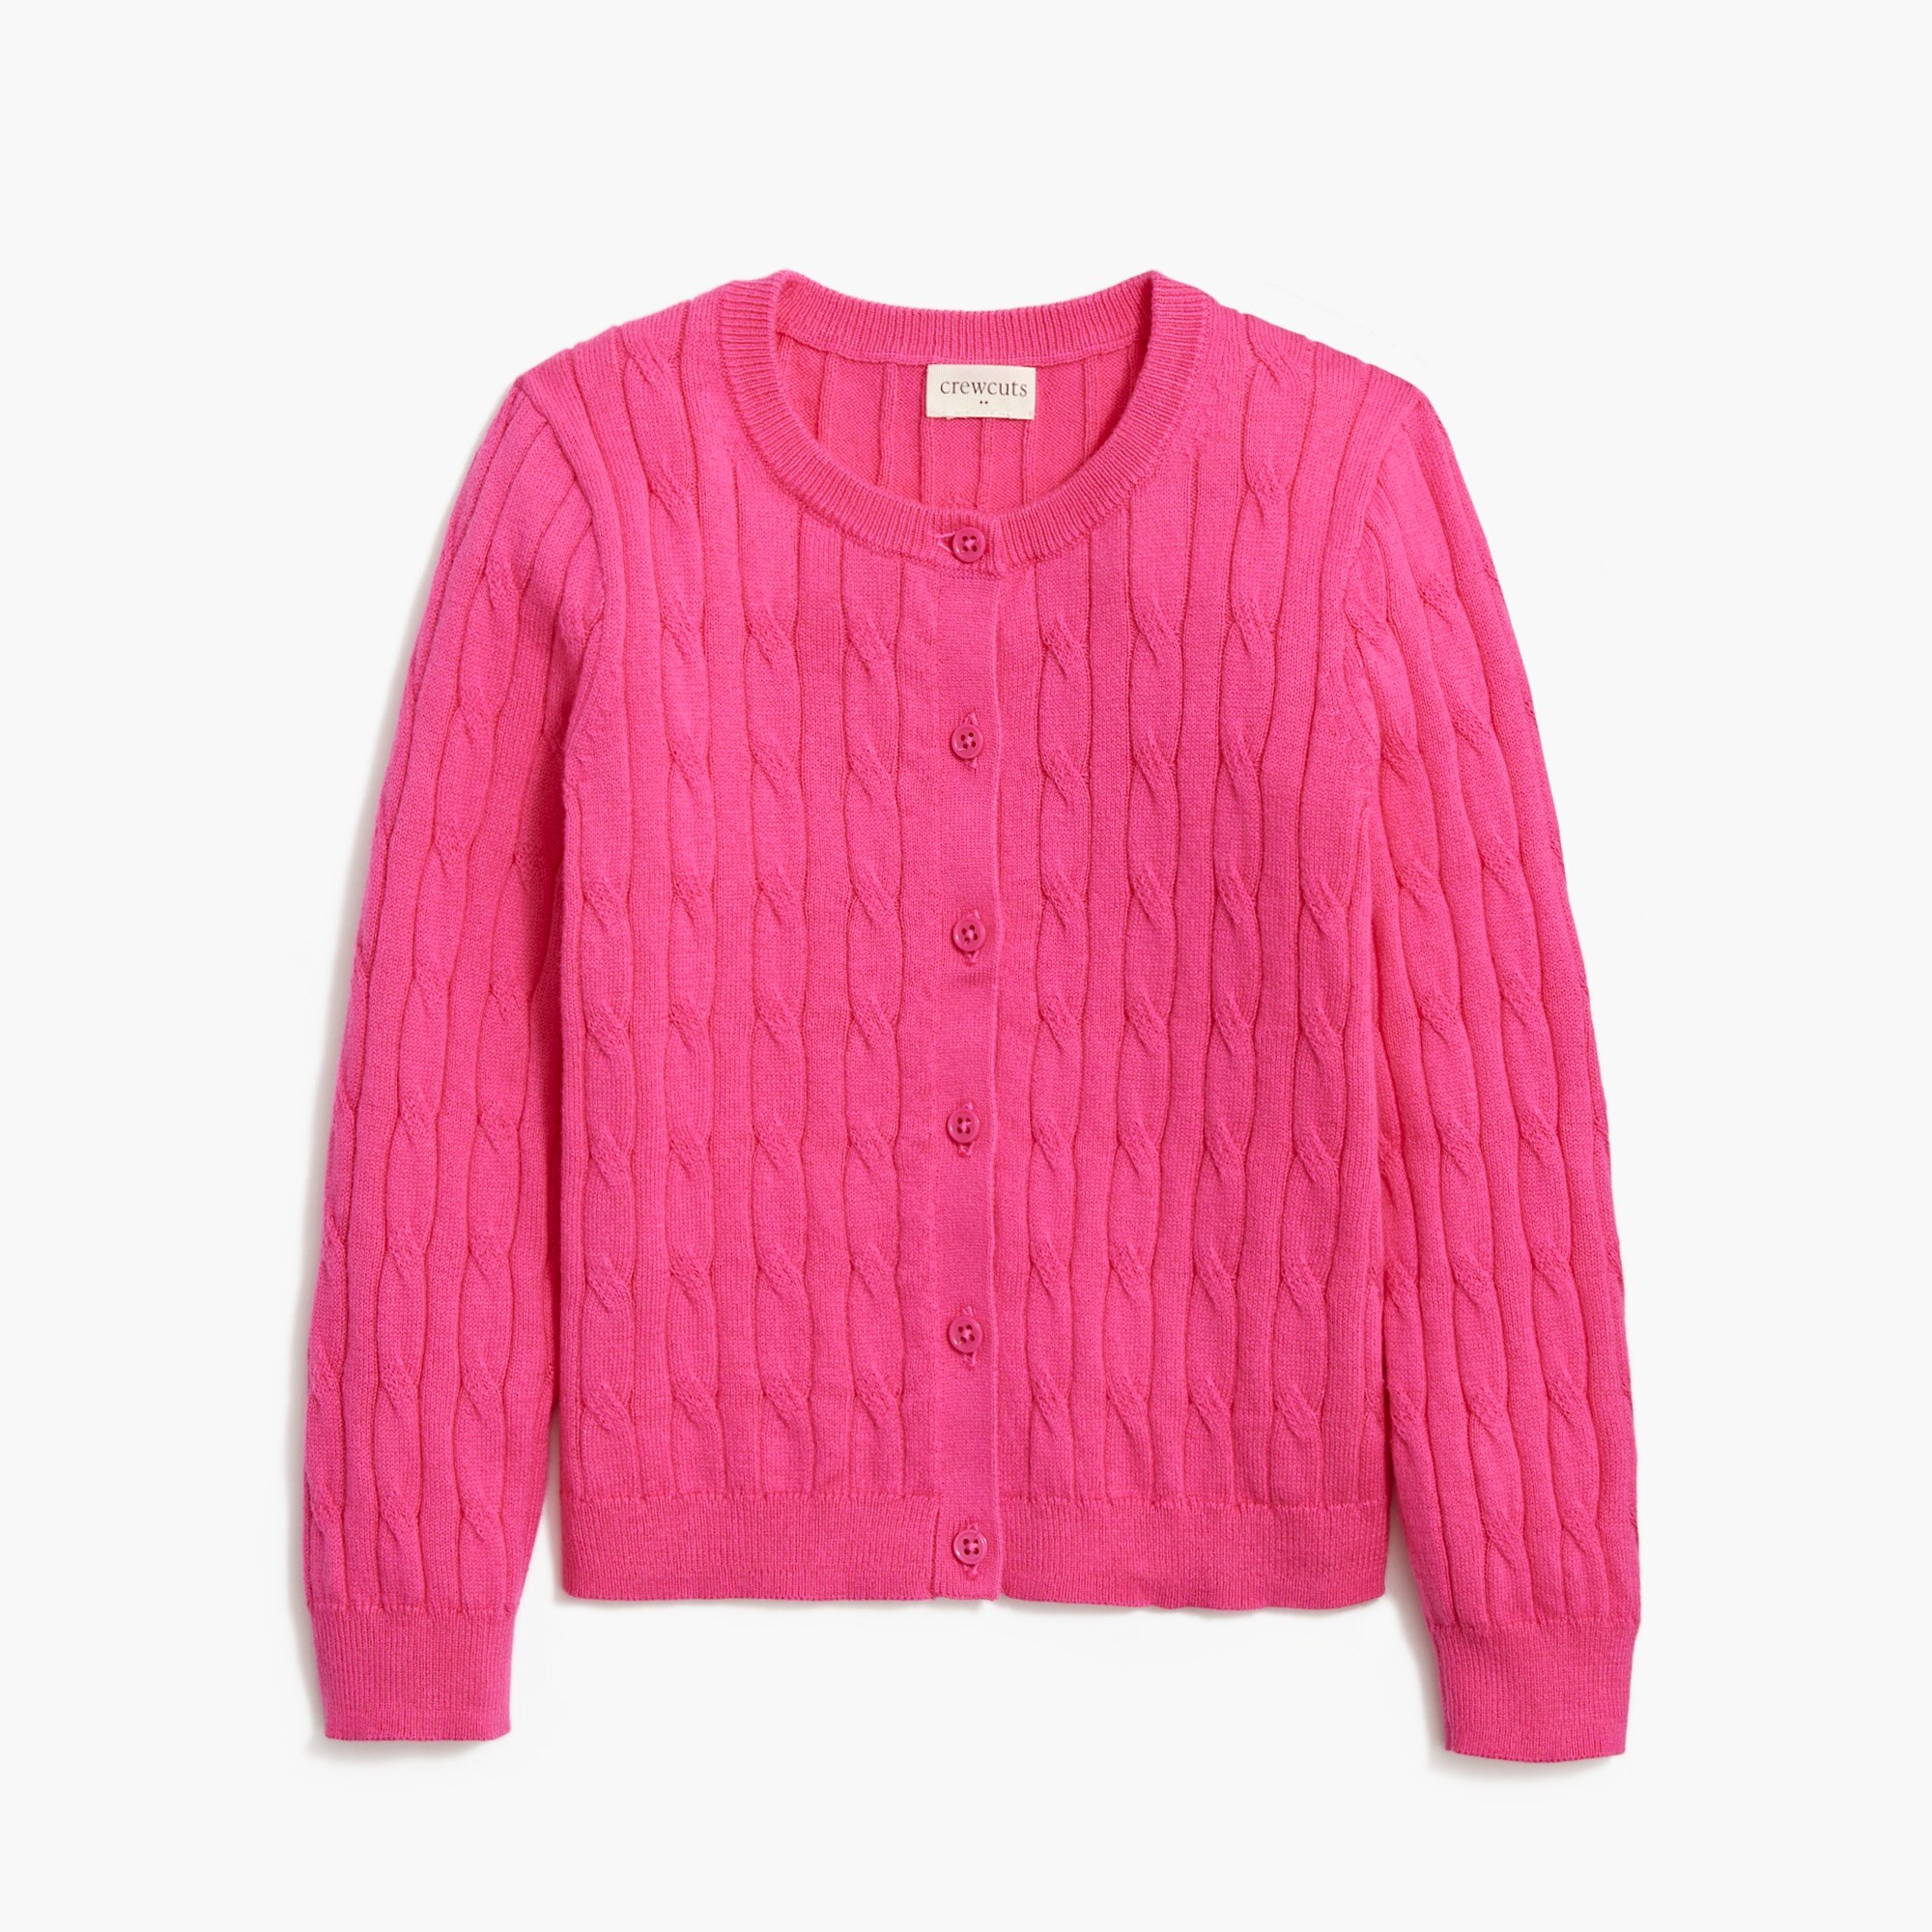  Girls' cable-knit Casey cardigan sweater